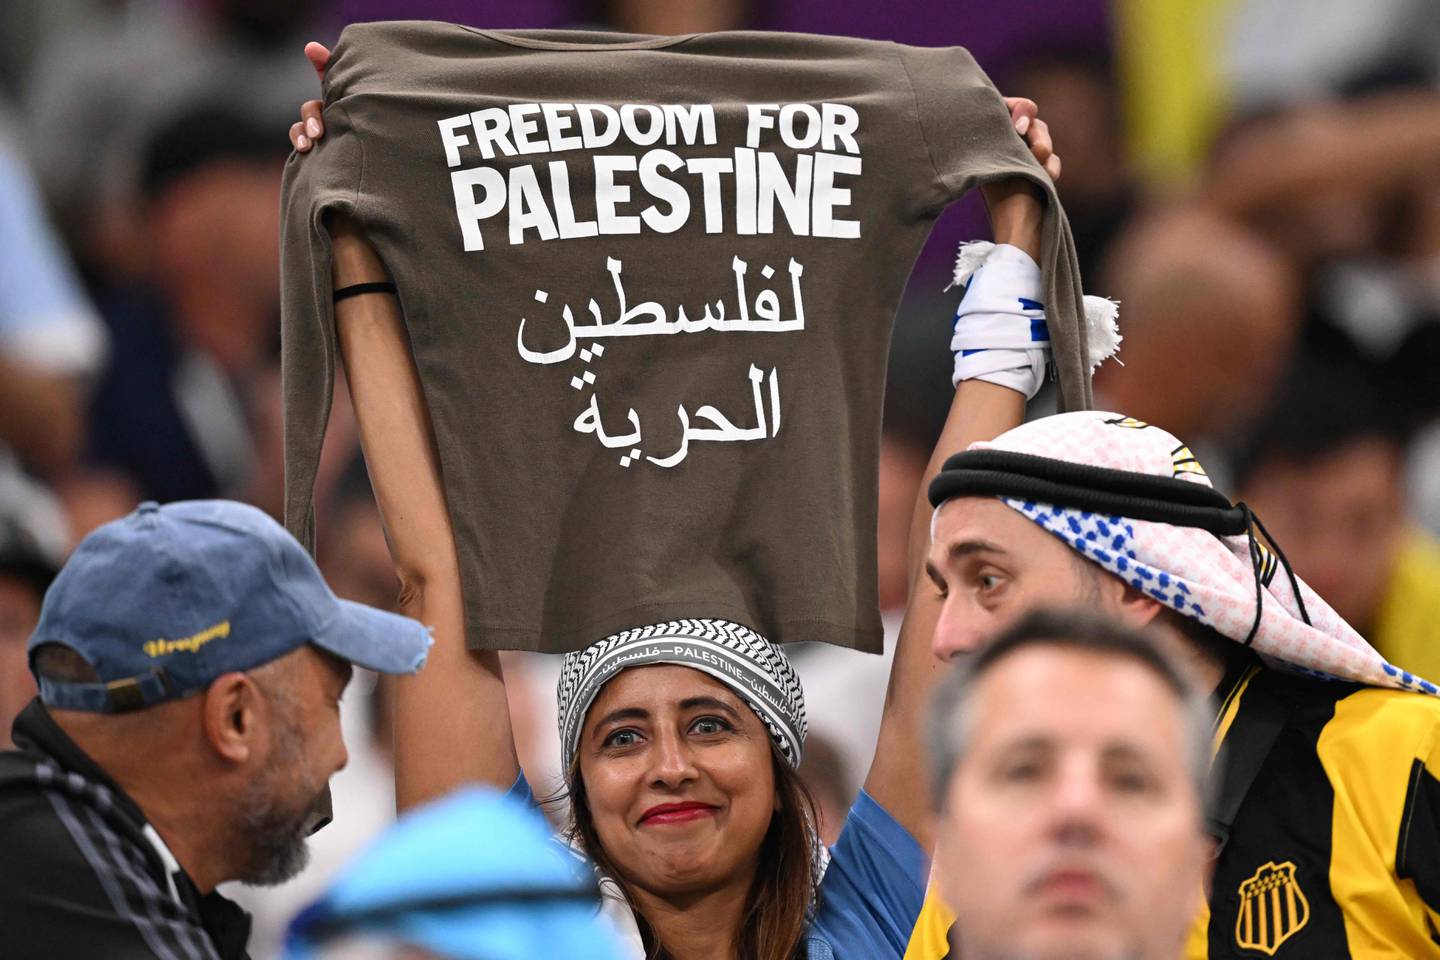 A Uruguay fan holds aloft a T-shirt showing support for Palestine during the match against Portugal at the Lusail Stadium. AFP